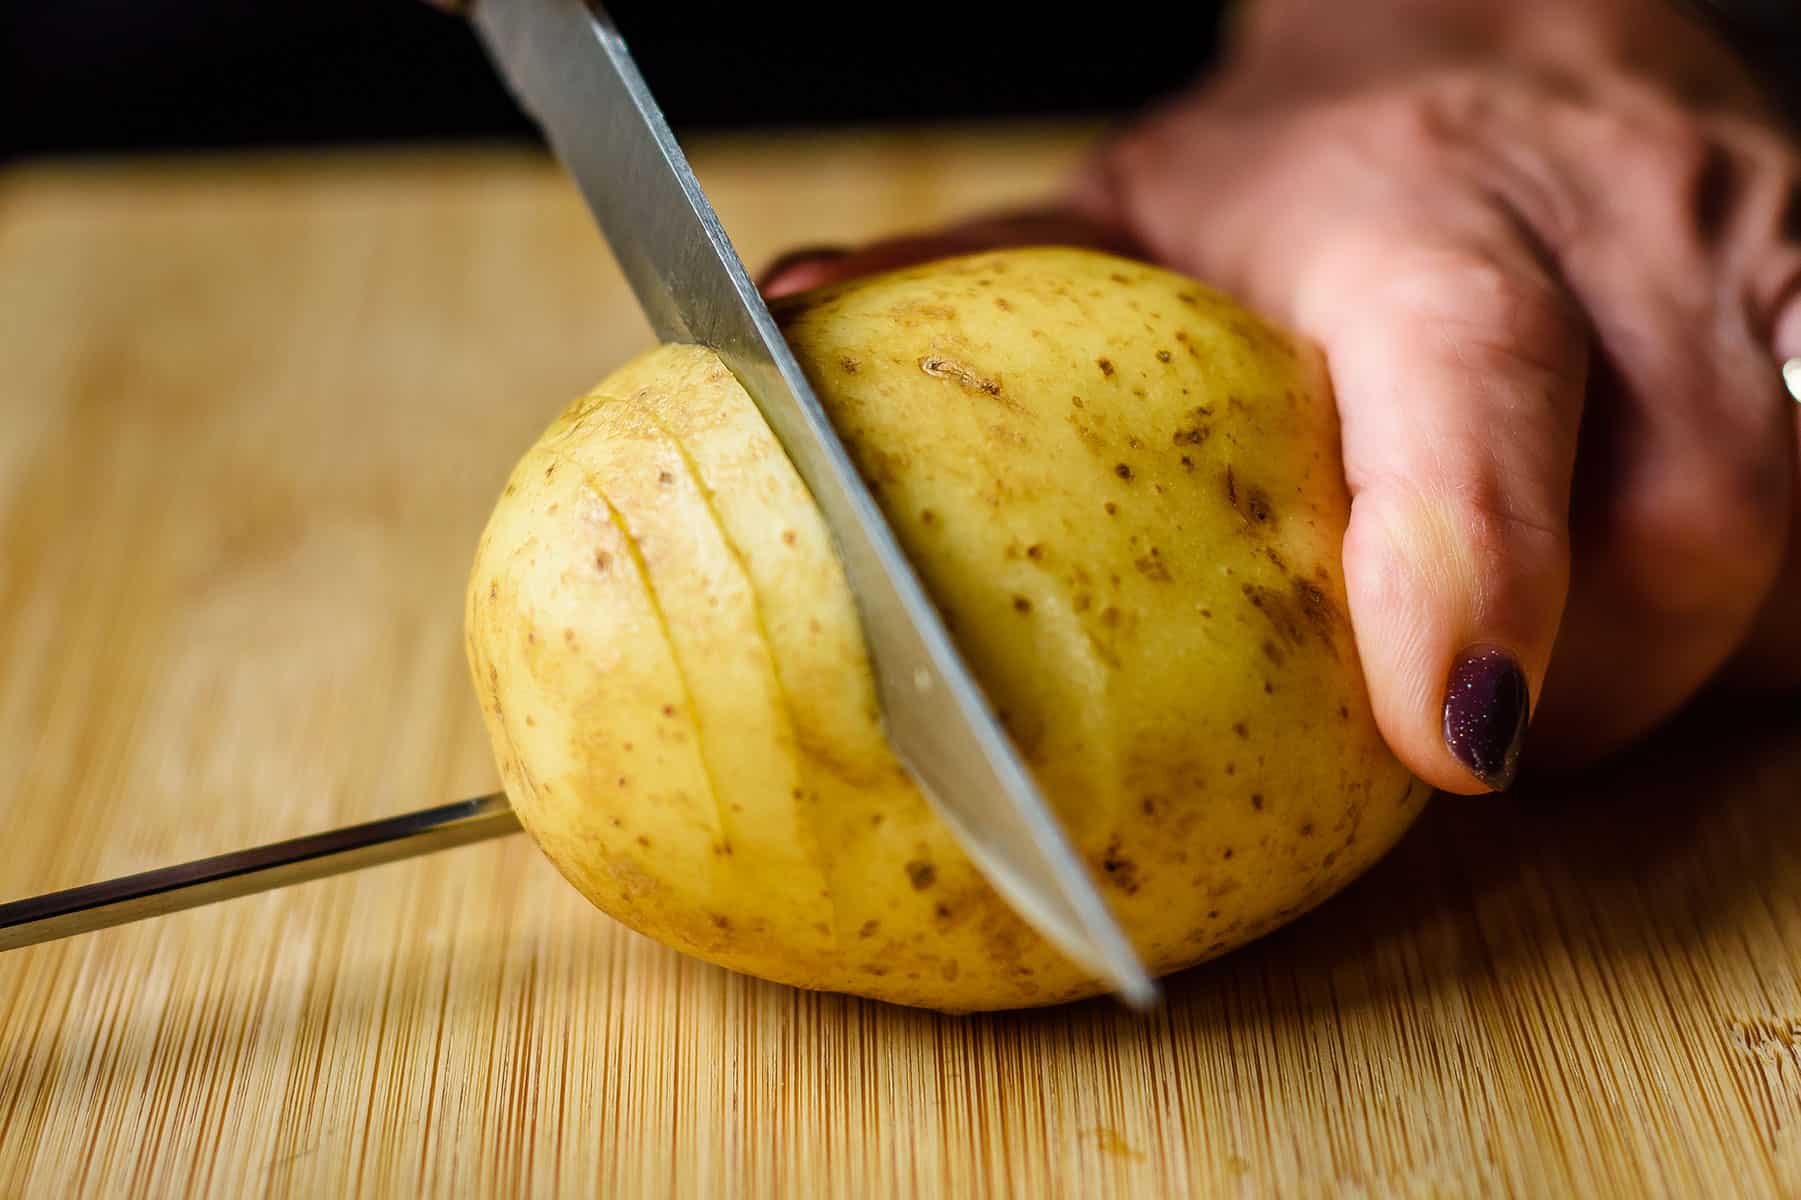 Starting to slice through potato from one end